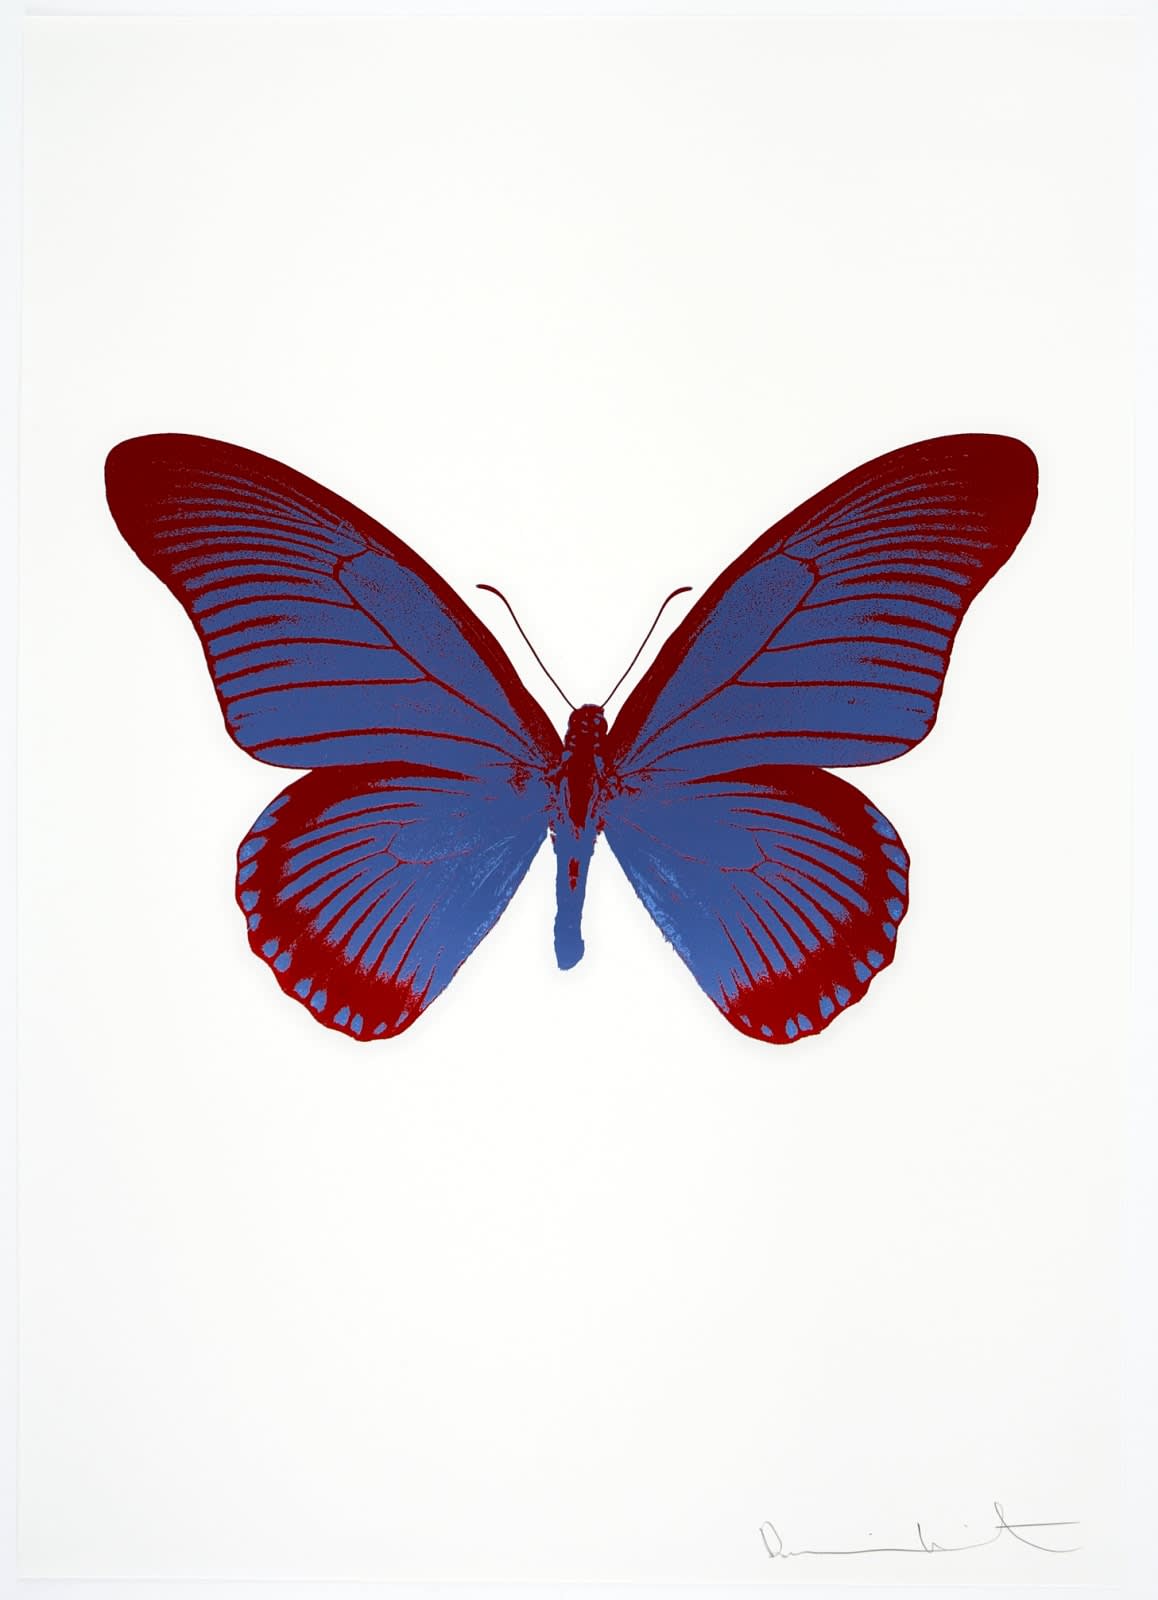 Damien Hirst, The Souls IV - Frost Blue/Chilli Red Damien Hirst Butterfly Foil Print, 2010